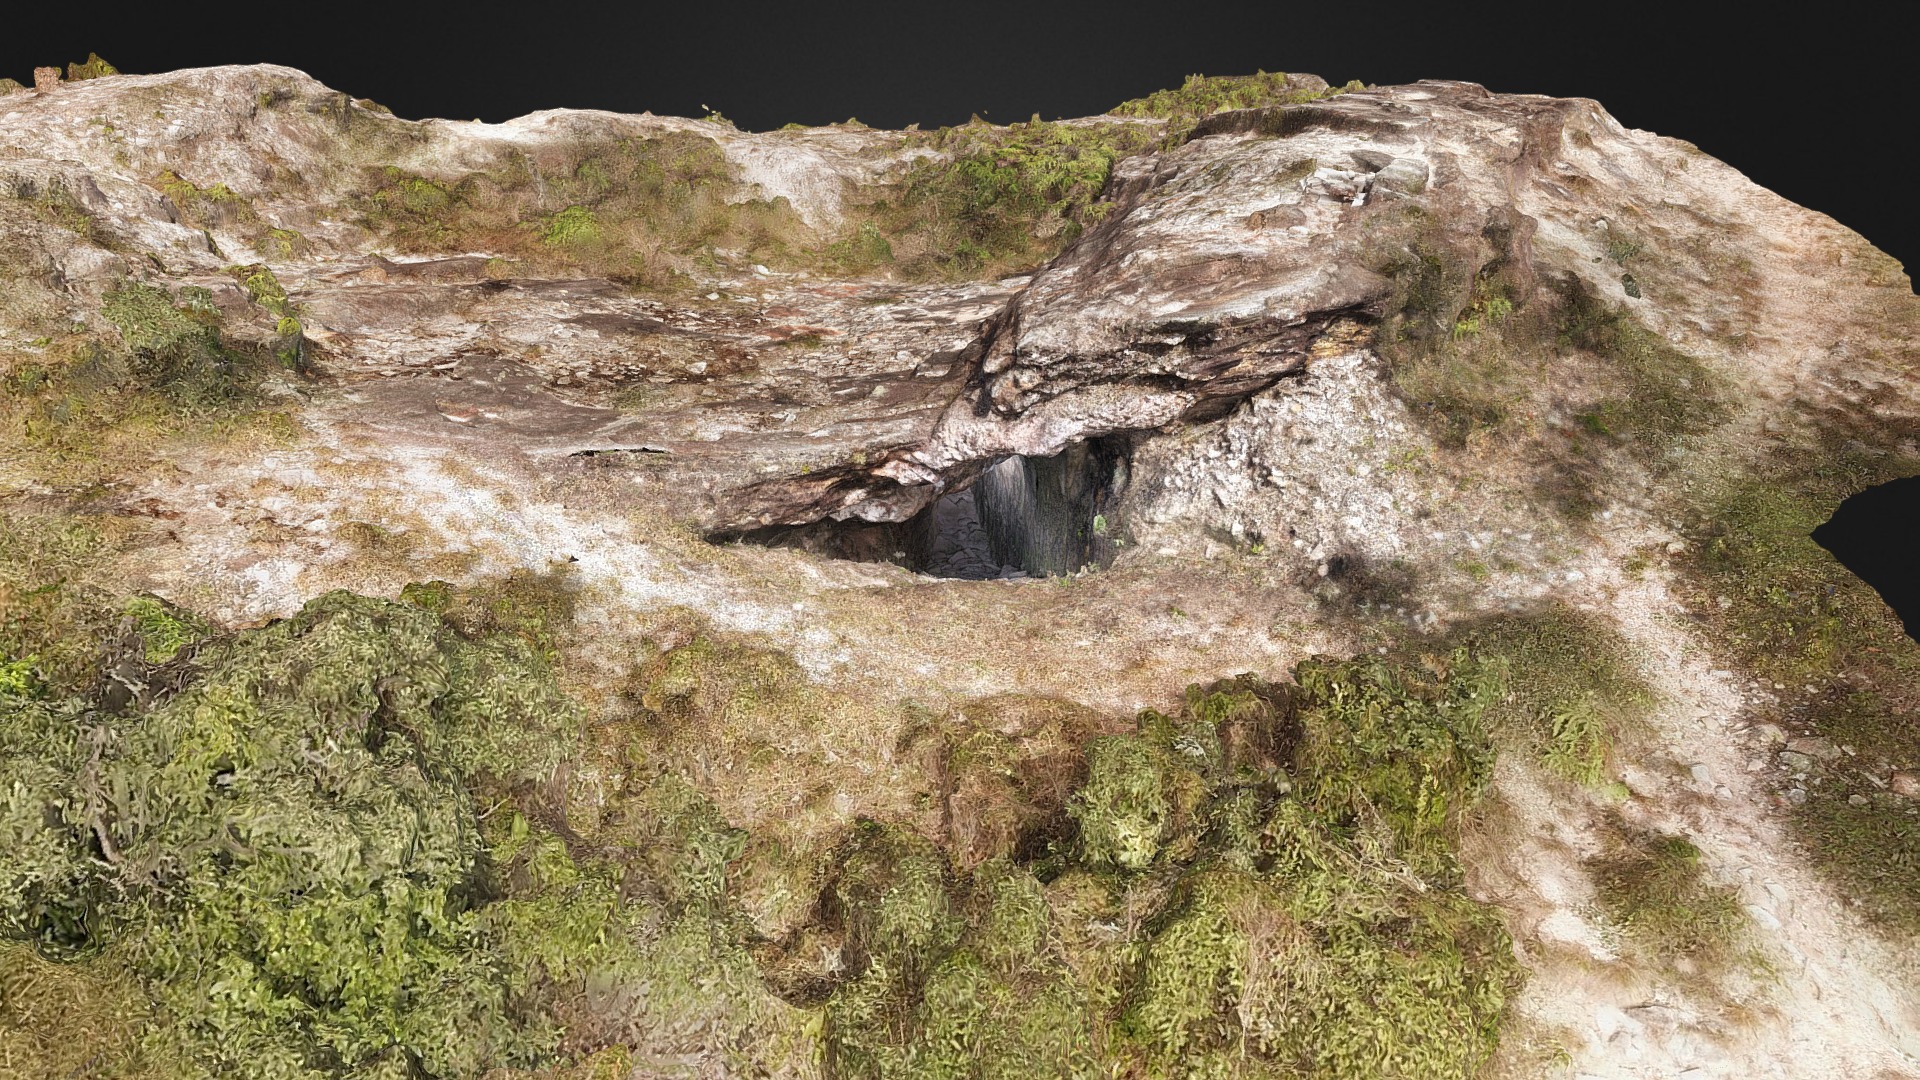 3D model Minas do Morro da Queimada – 016 - This is a 3D model of the Minas do Morro da Queimada - 016. The 3D model is about a large rock formation.